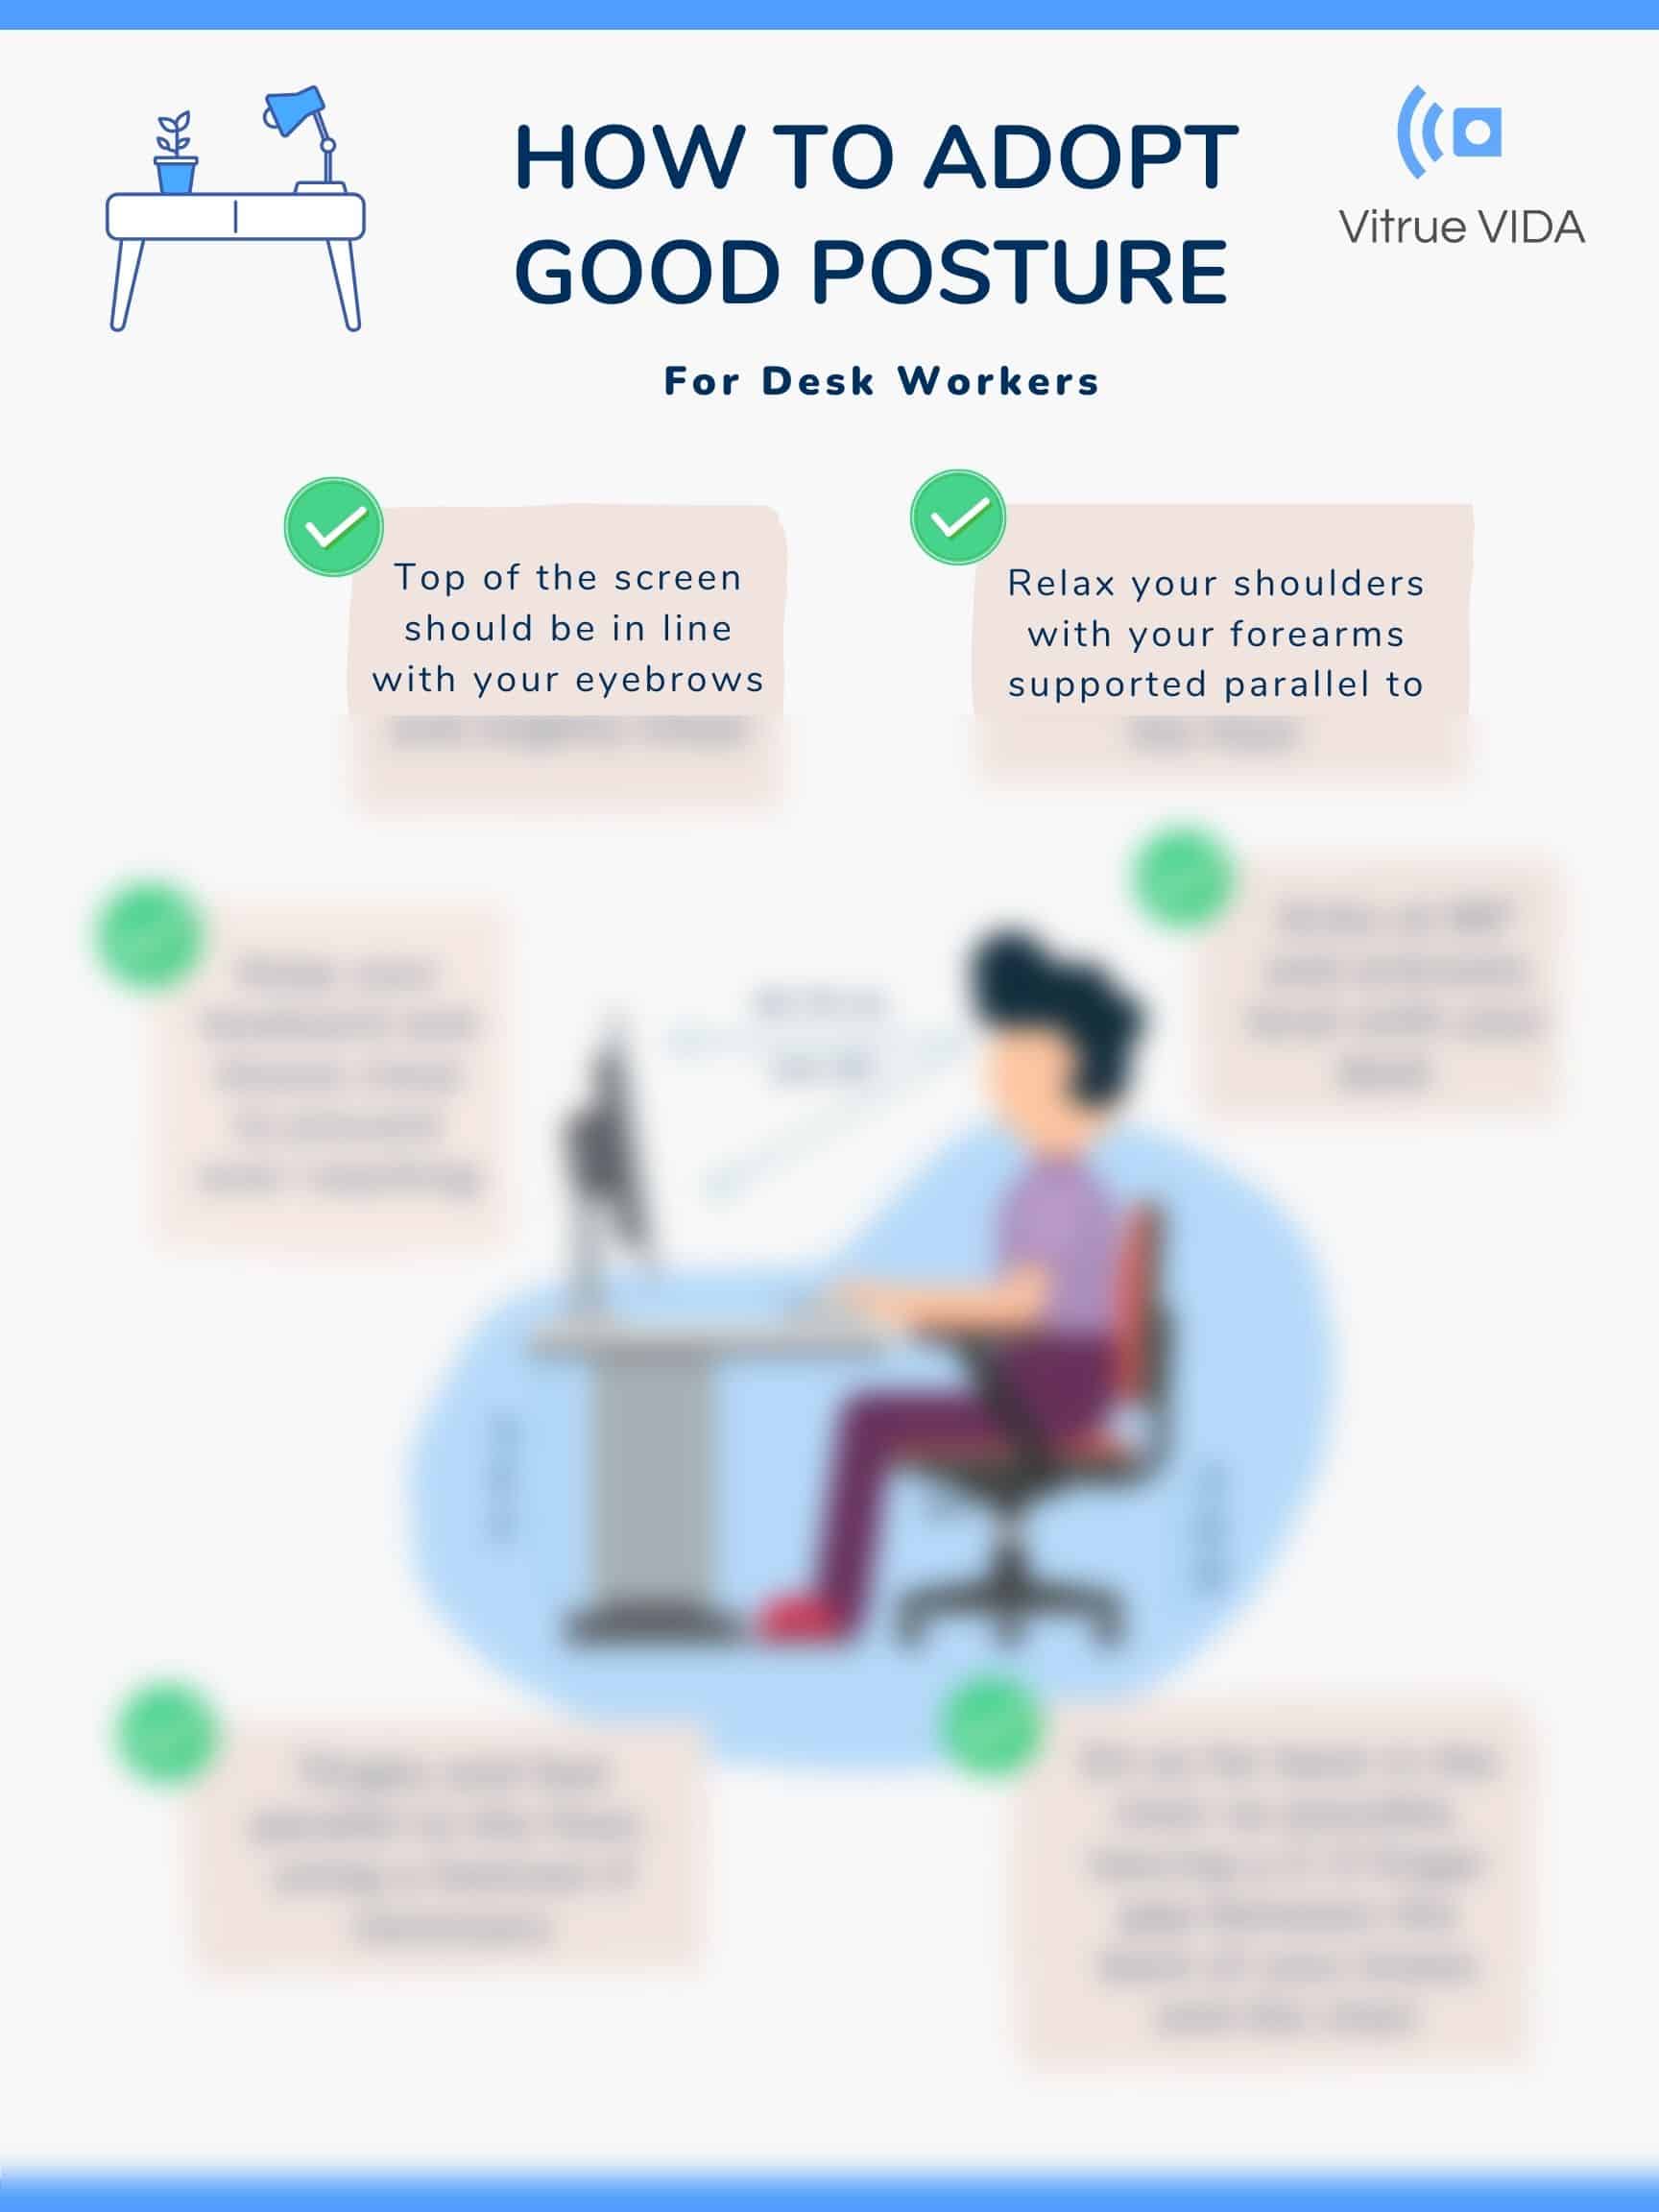 How to Adopt Good Posture at a Desk